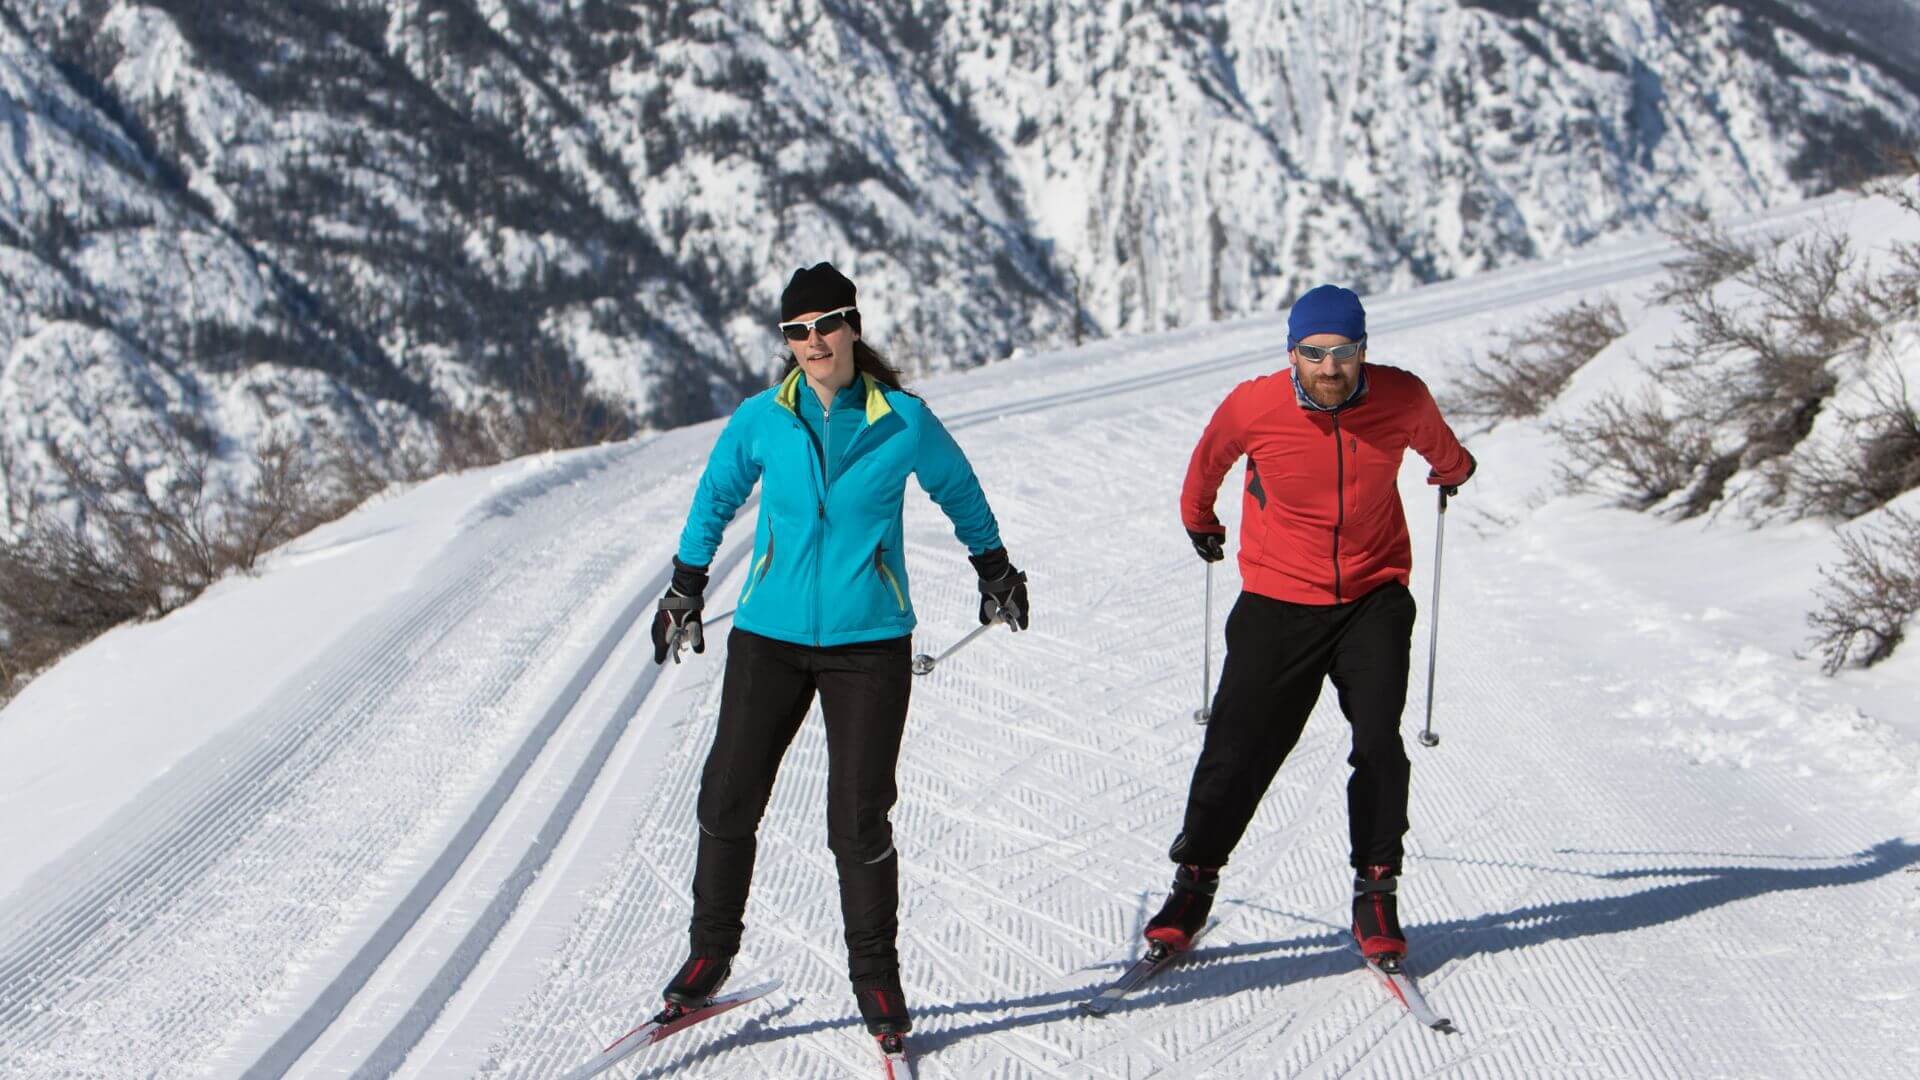 Man in red jacket and woman in blue jacket cross country skiing along a well traveled trail.